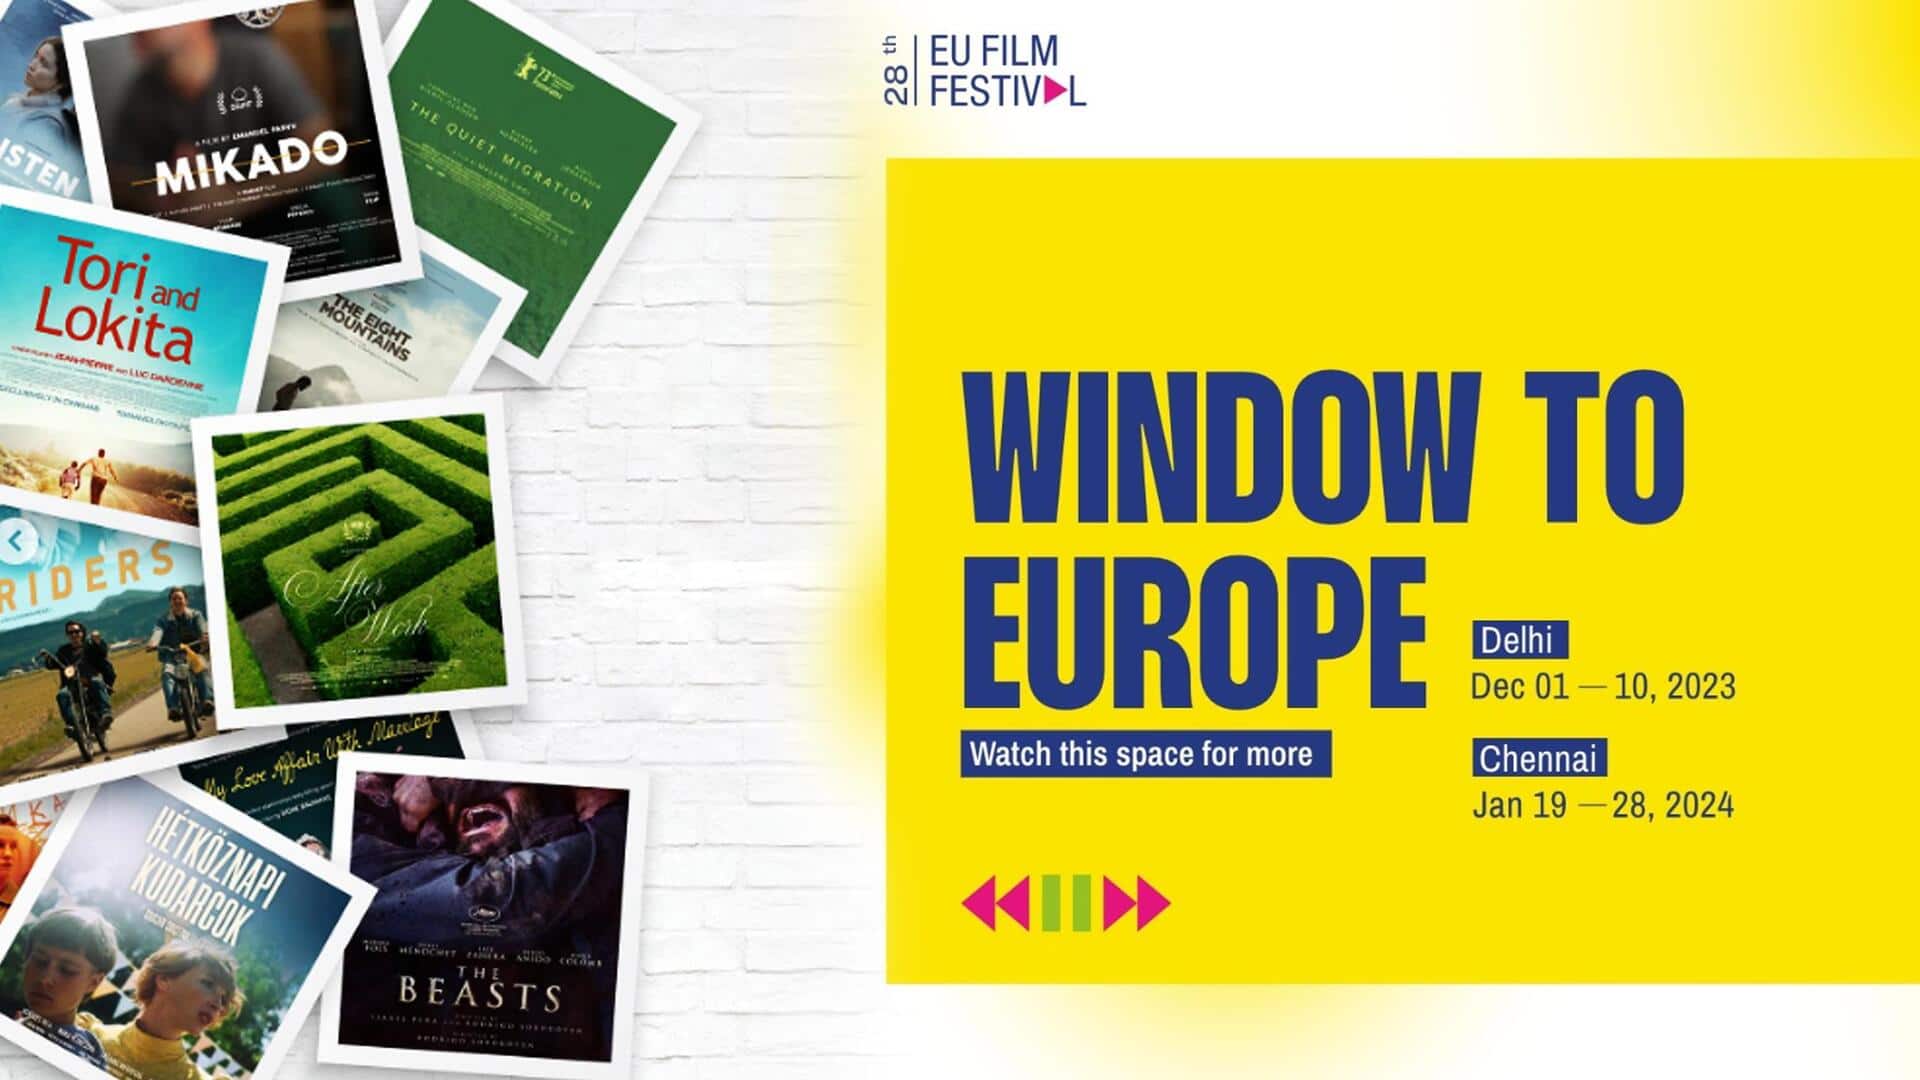 Find out which movies are premiering at EUFF 2023